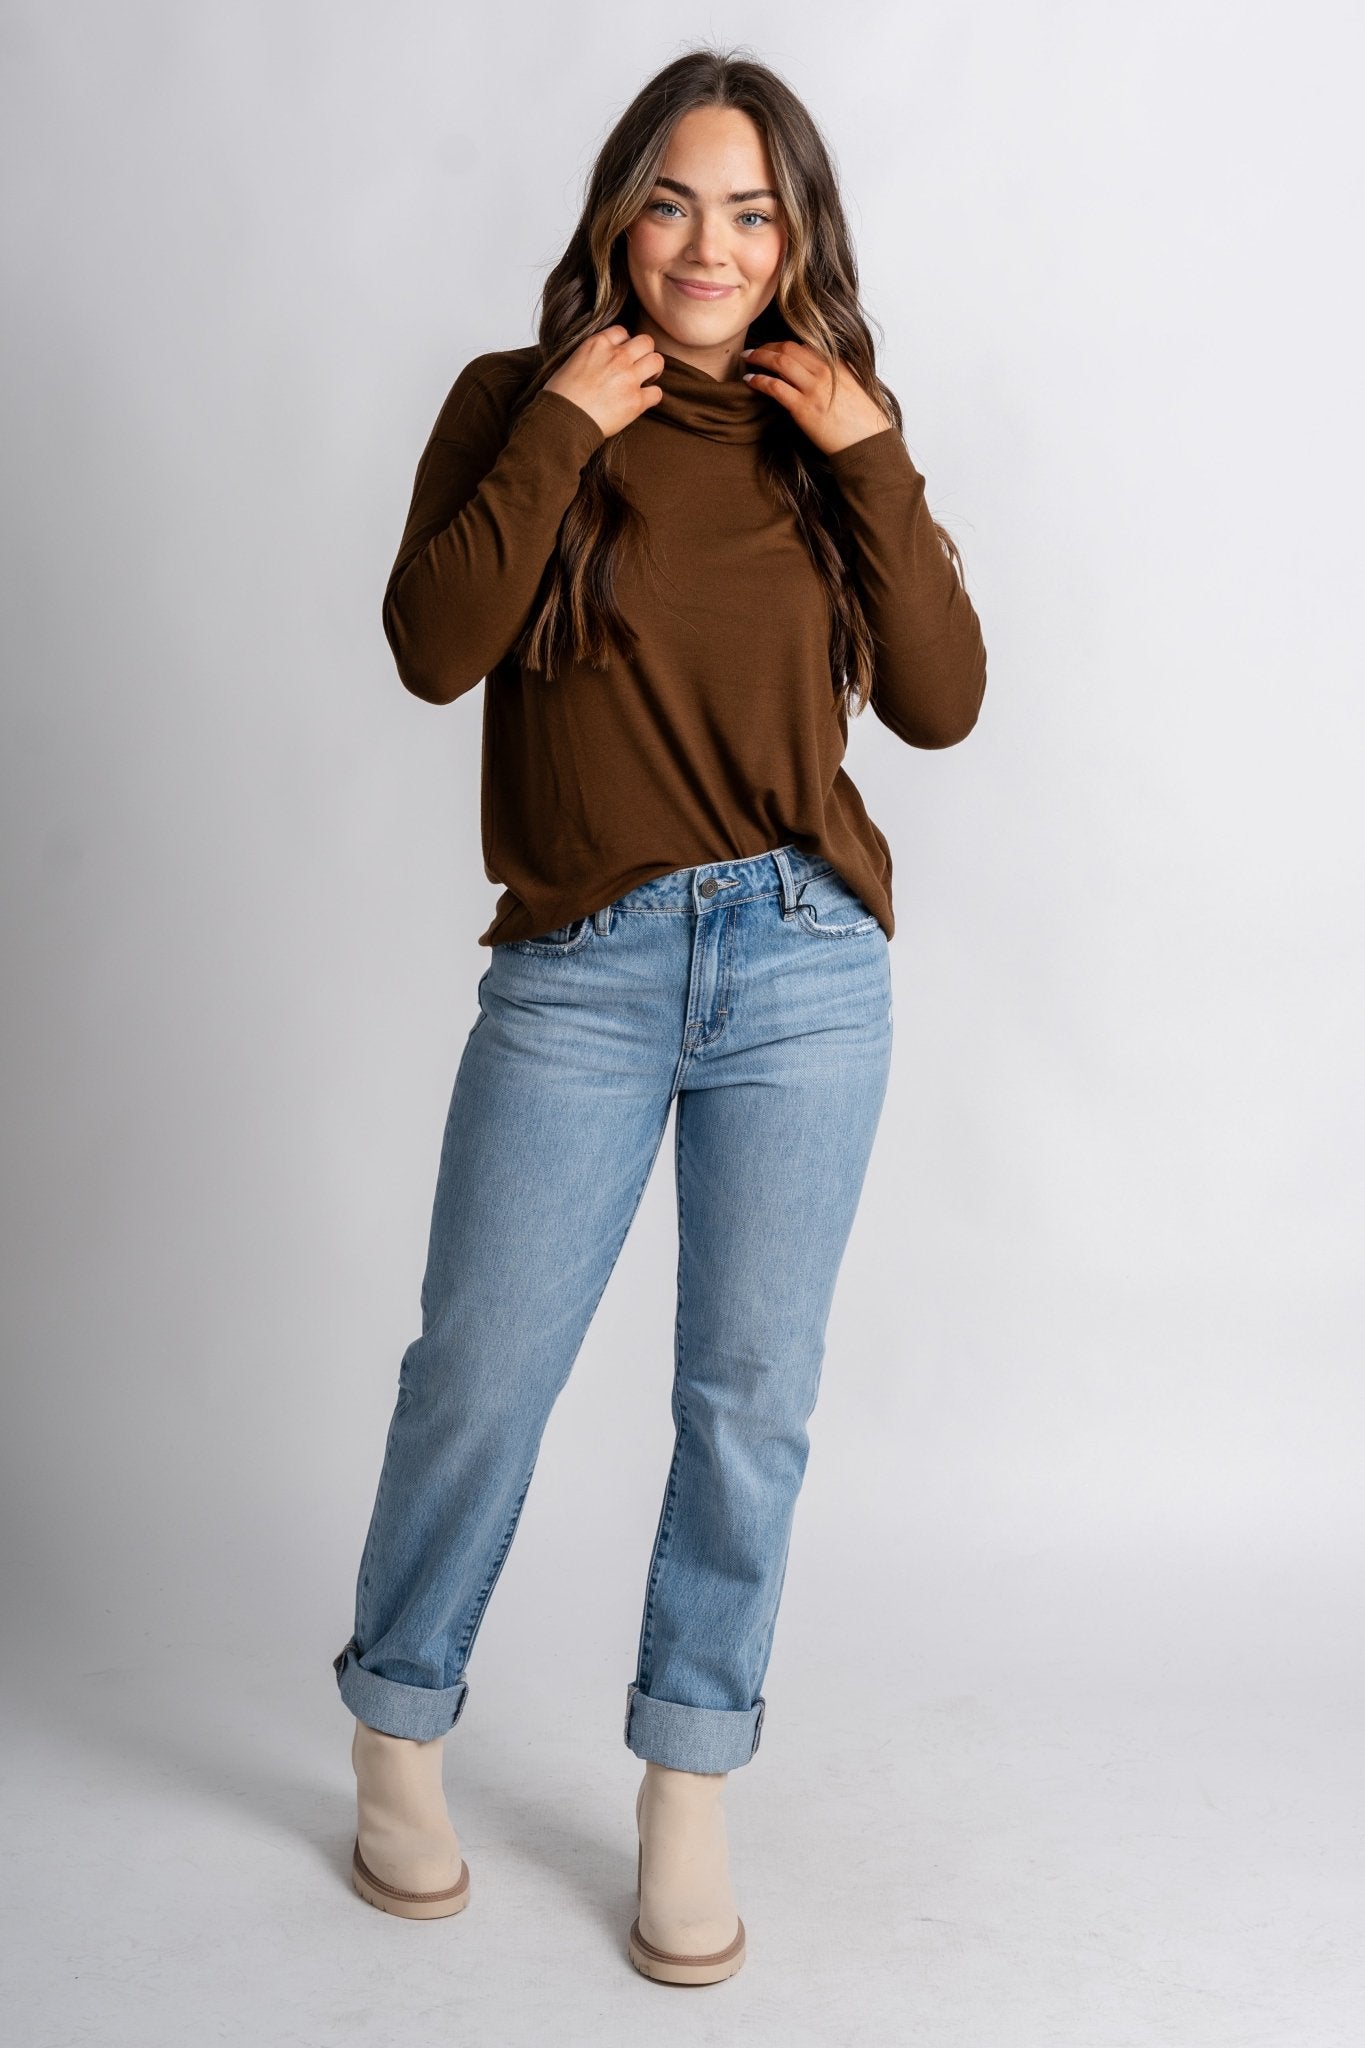 Mock cowl neck long sleeve top espresso – Unique Sweaters | Lounging Sweaters and Womens Fashion Sweaters at Lush Fashion Lounge Boutique in Oklahoma City